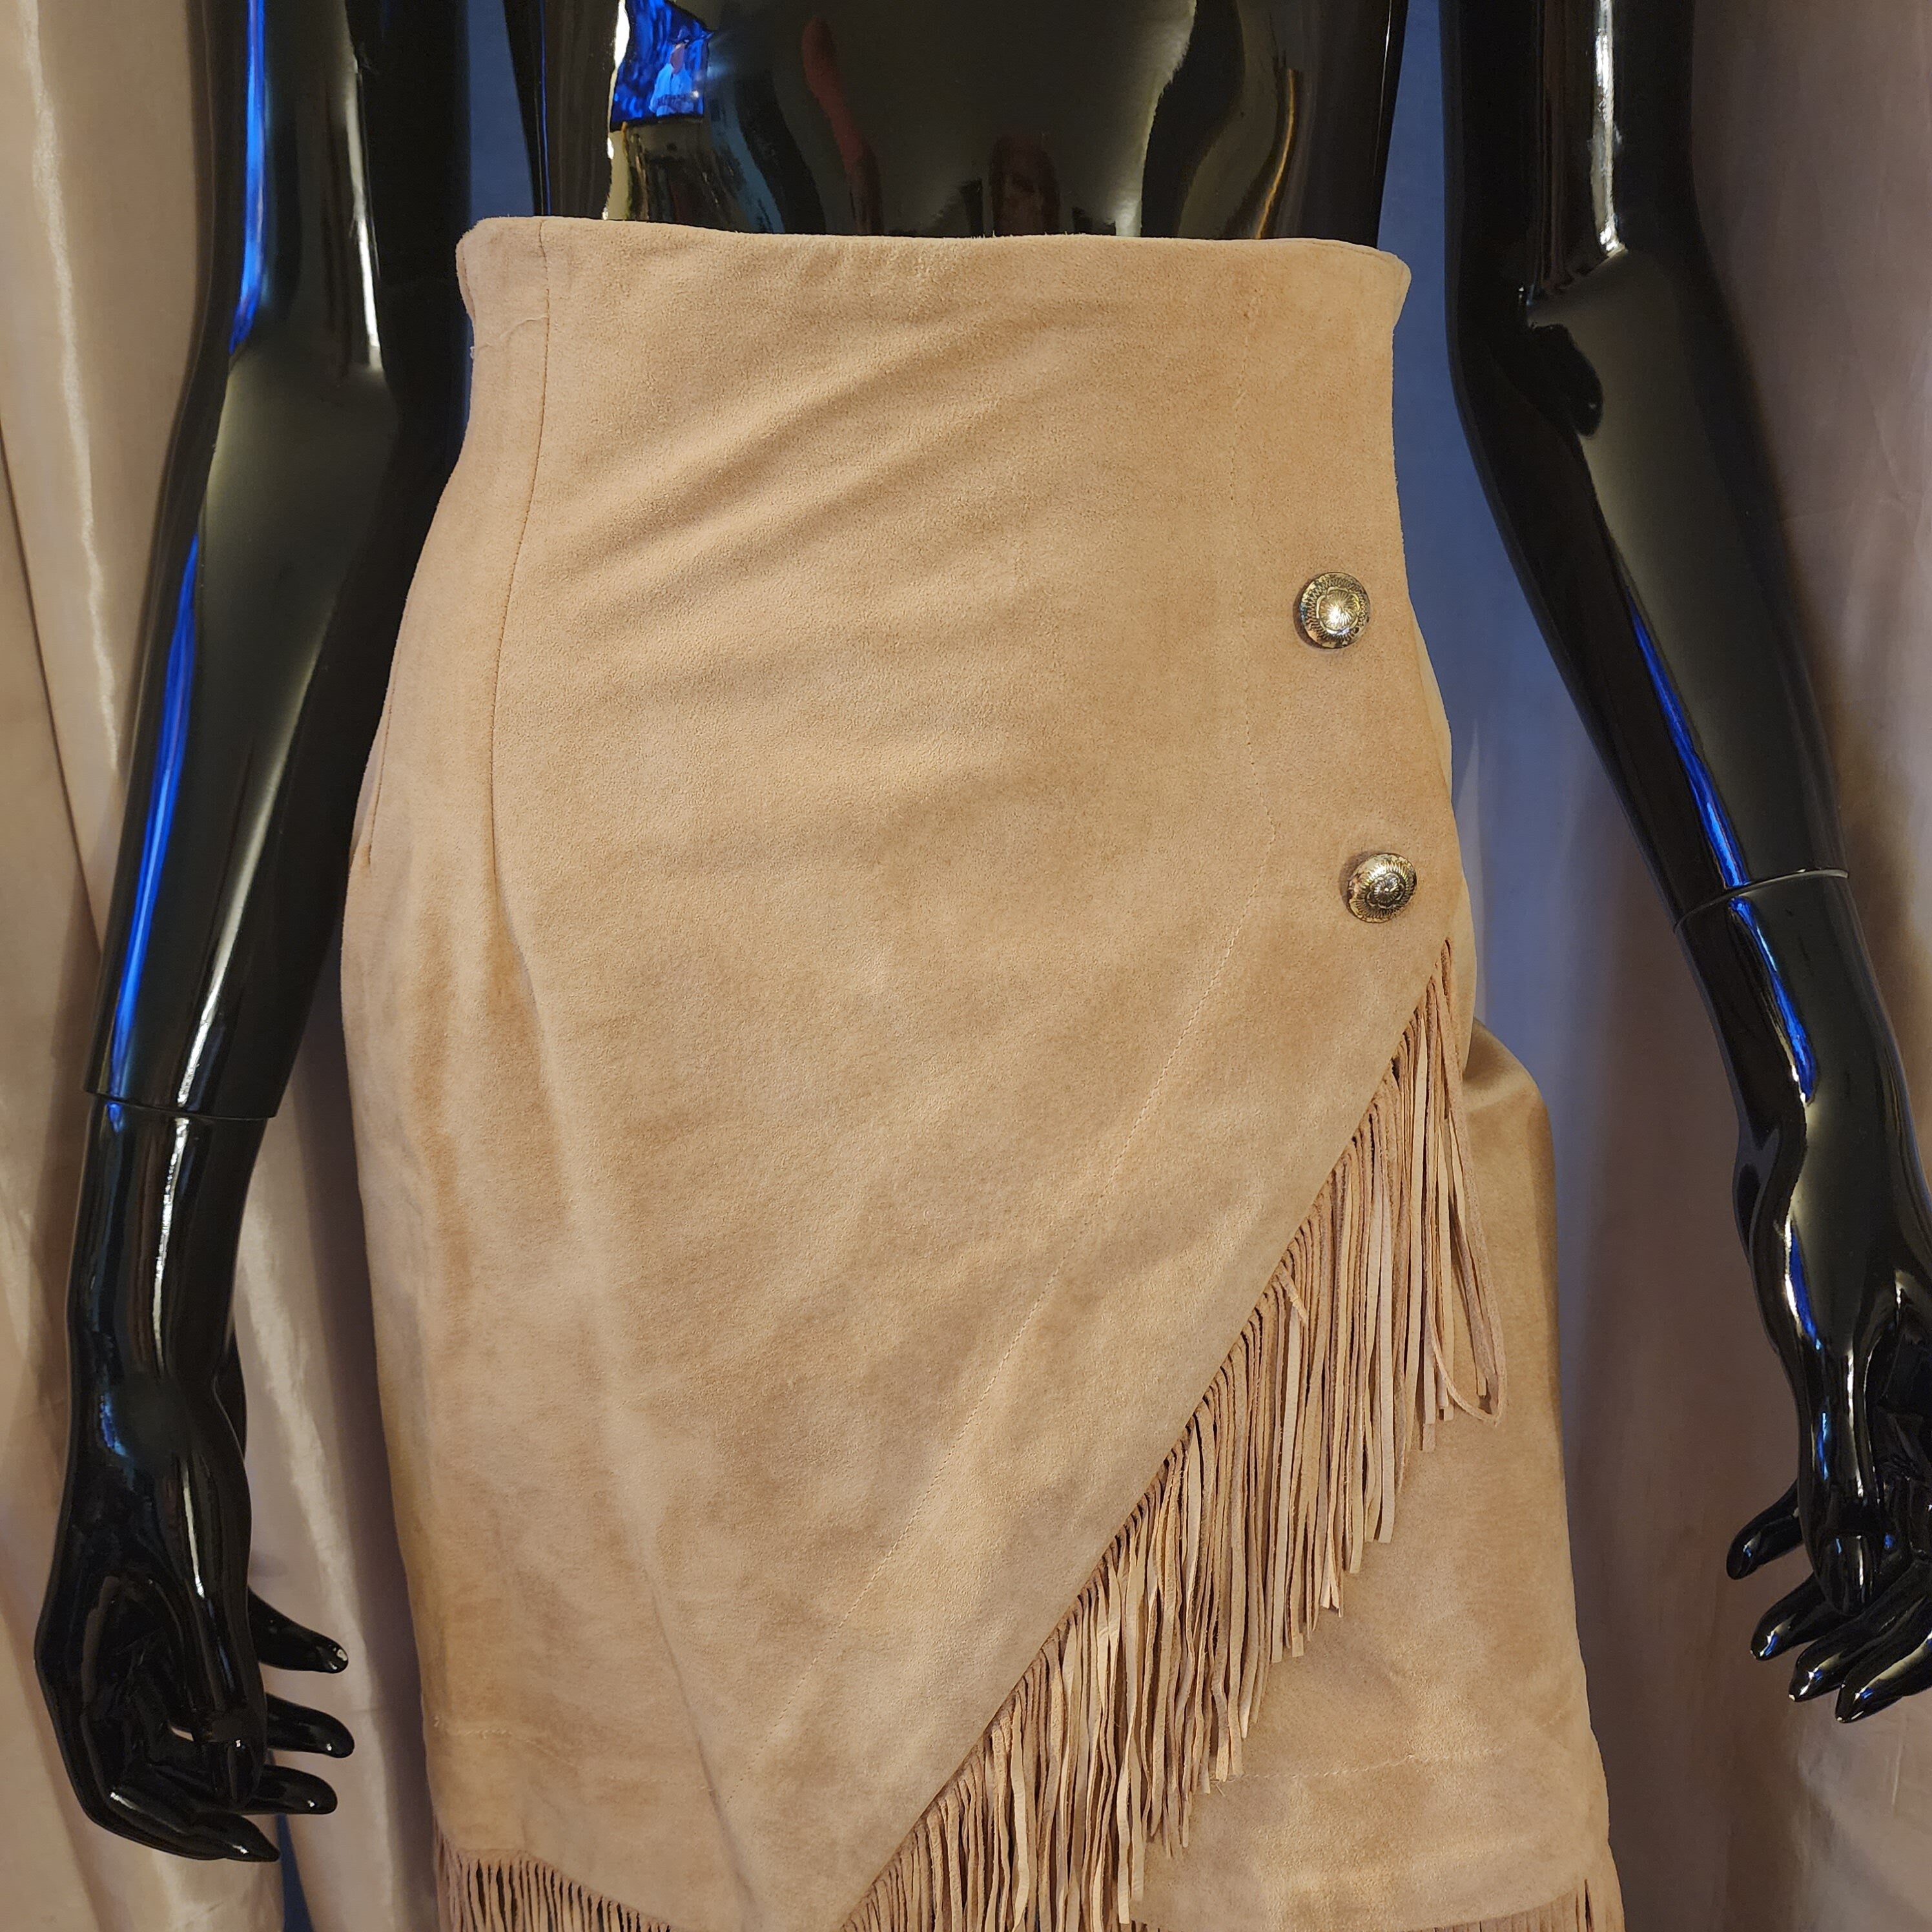 Vintage 80s-90s Western Suede Fringe Skirt, By The Austin Collection Made In Texas Size 4, Camel Color